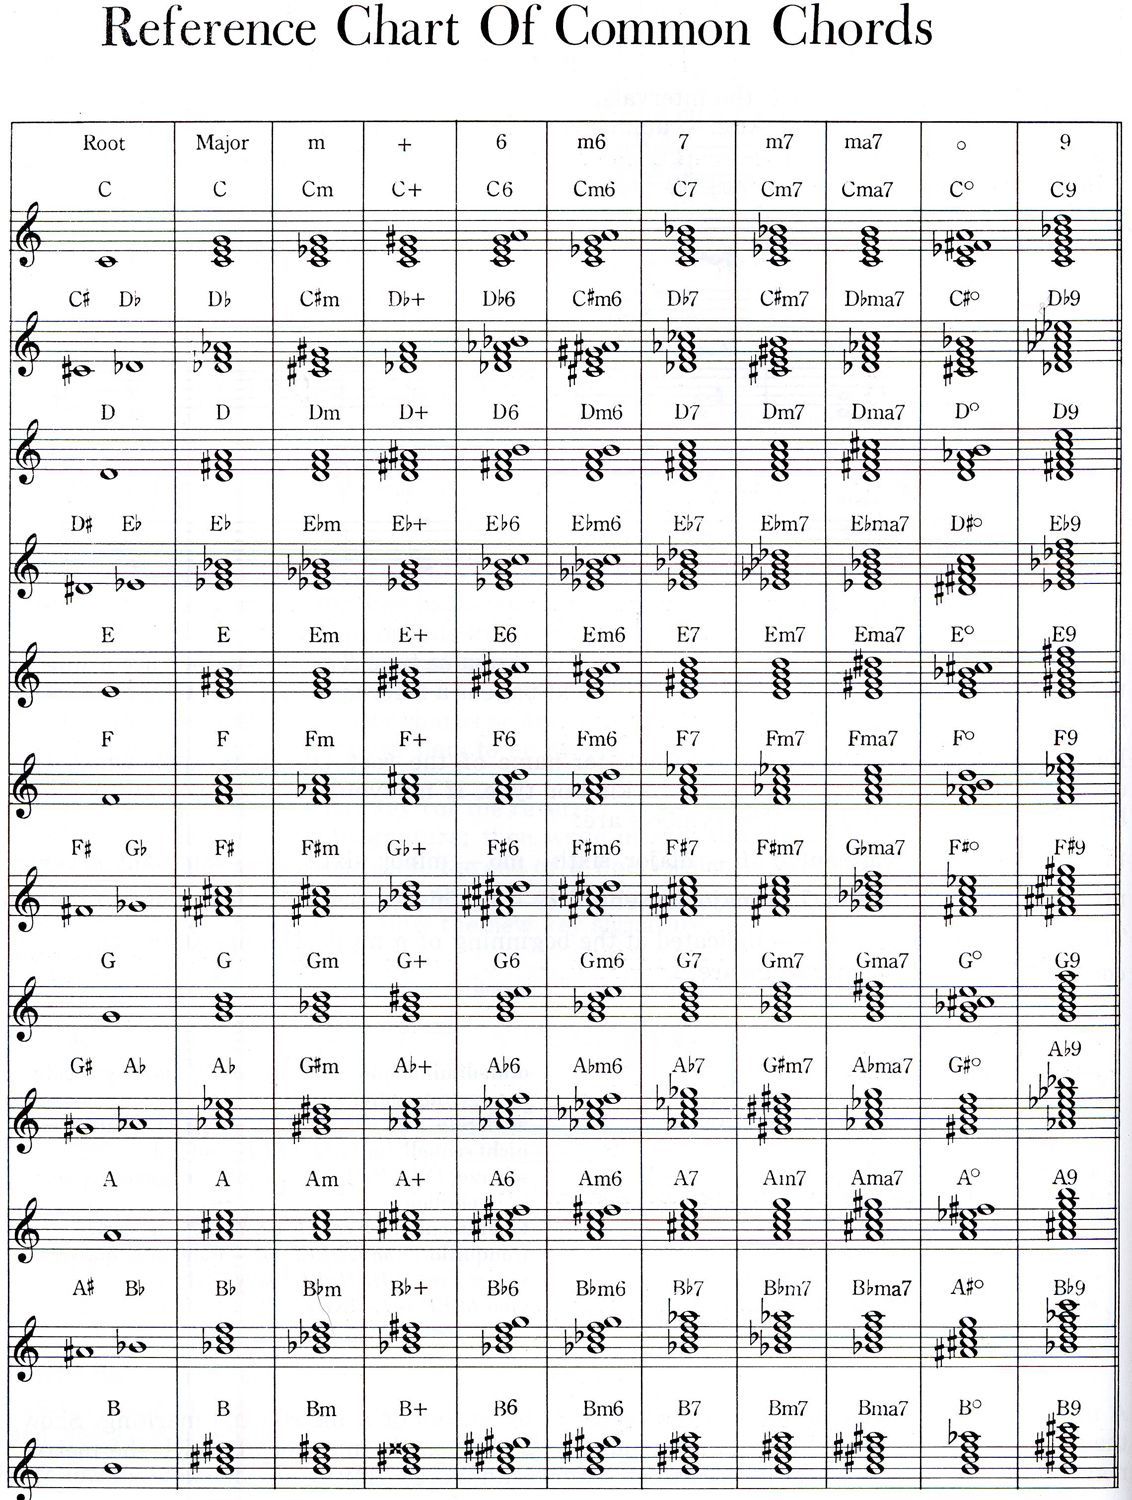 How to read chords on sheet music? | Adult Beginners Forum | Piano World Piano & Digital Piano Forums